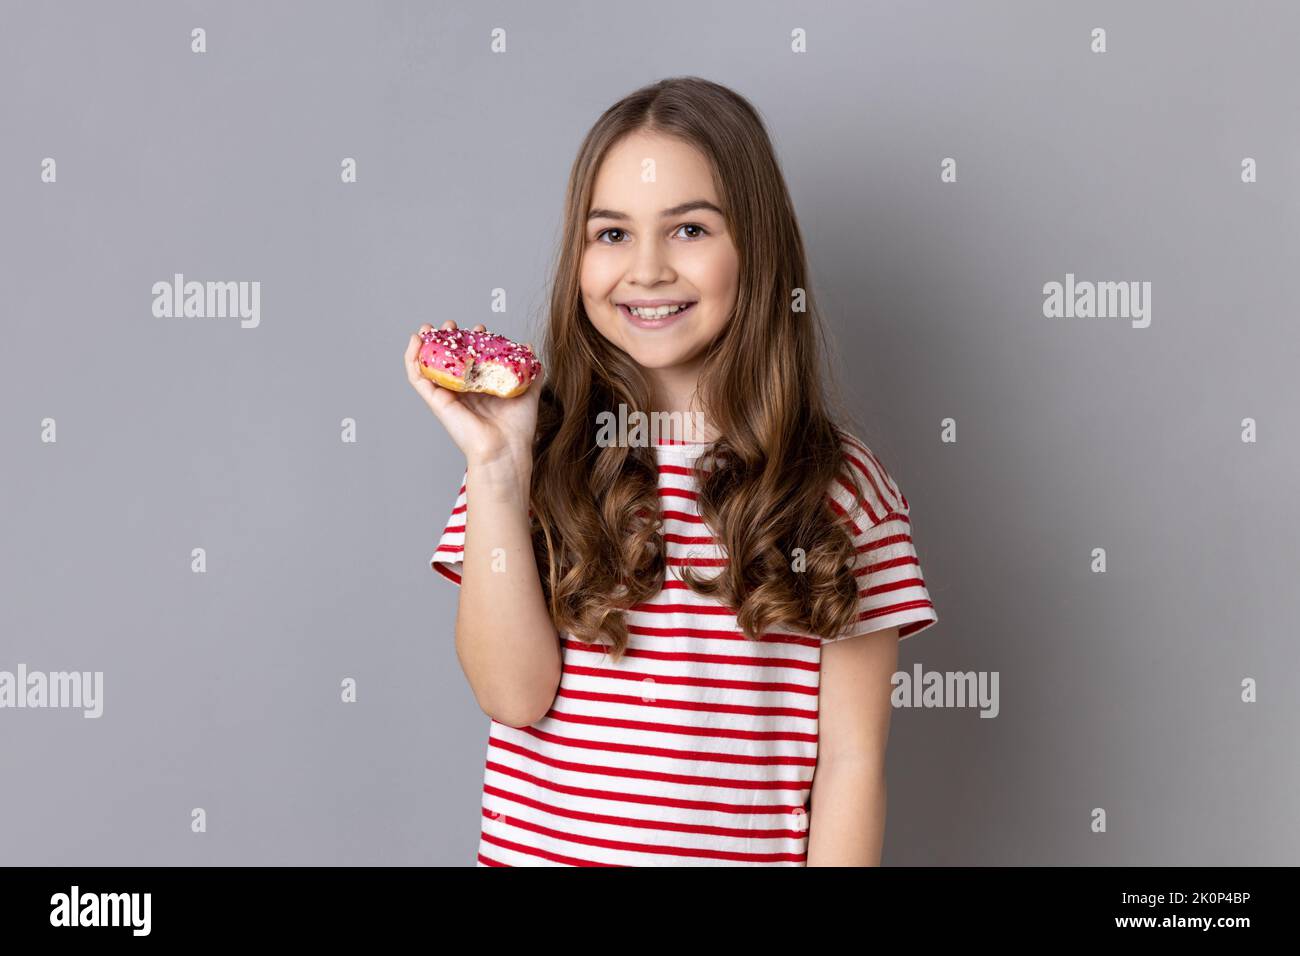 Portrait of delighted happy adorable little girl wearing striped T-shirt delicious sugary donut and smiling genuinely to camera. Indoor studio shot isolated on gray background. Stock Photo